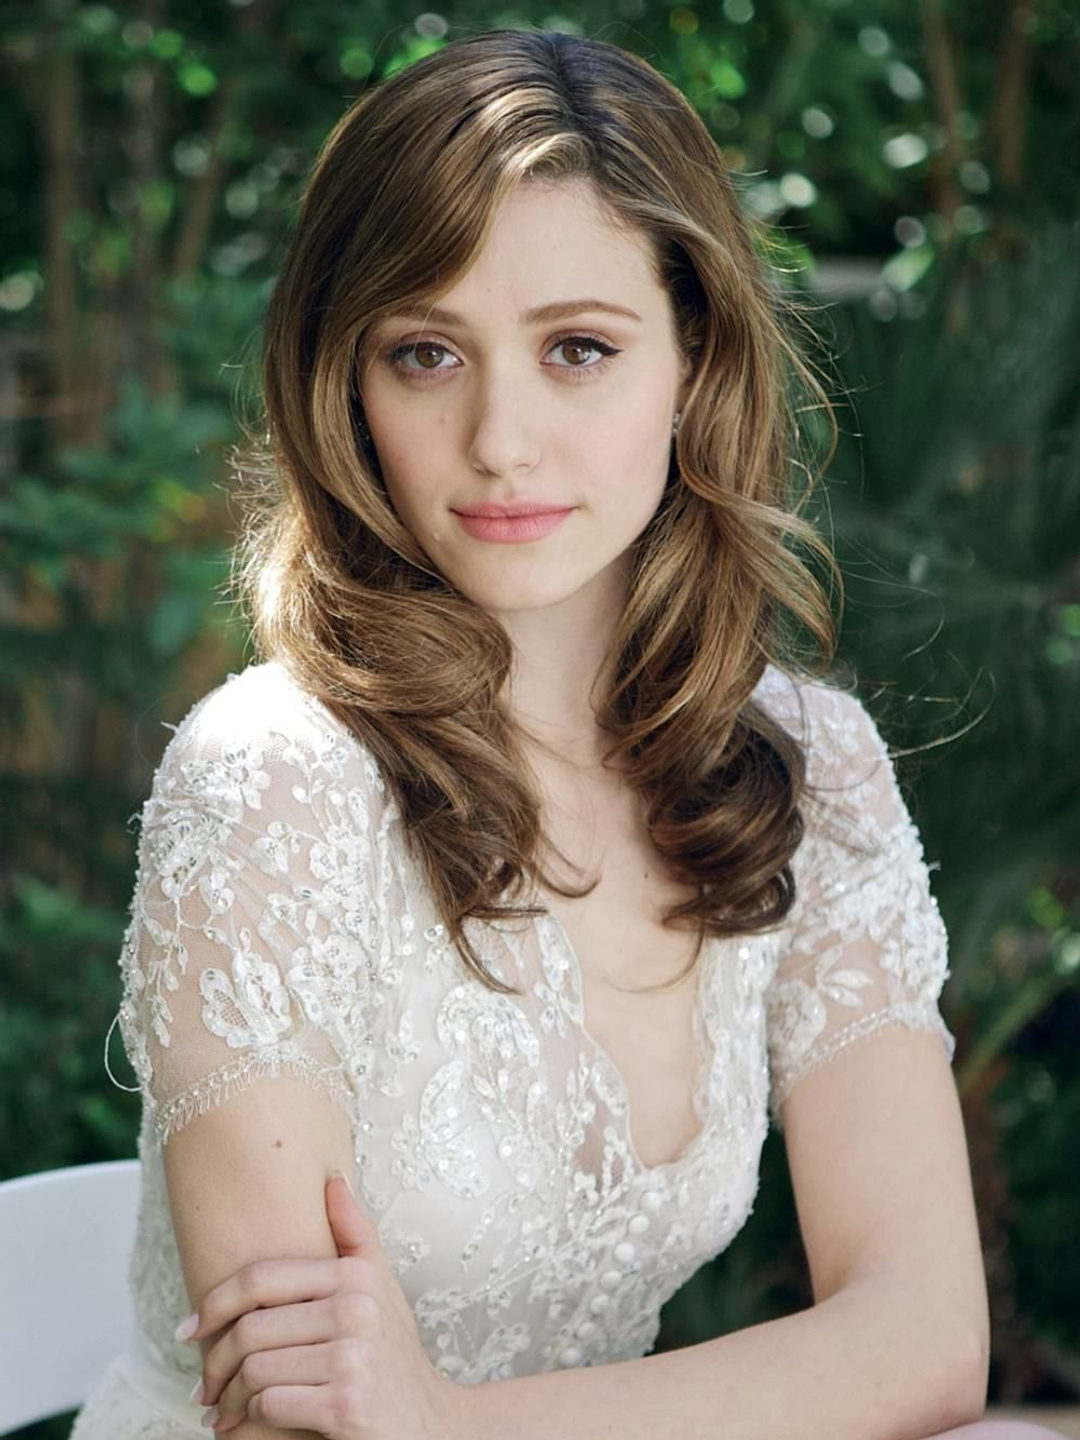 Emmy Rossum unphotoshopped pictures